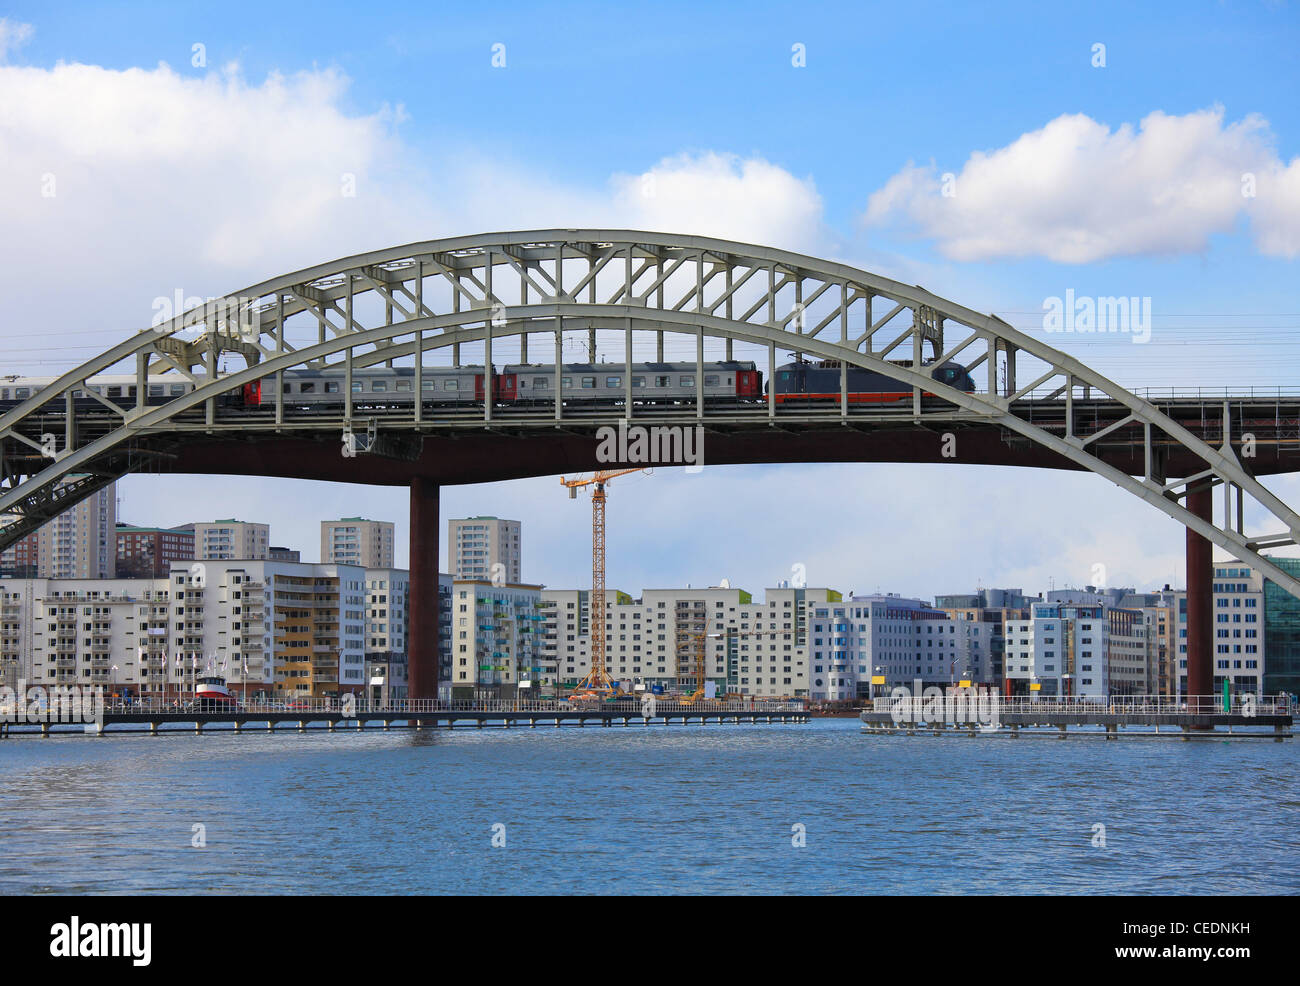 Railway Bridge with a train crossing over the water in Stockholm, capital of Sweden. Stock Photo